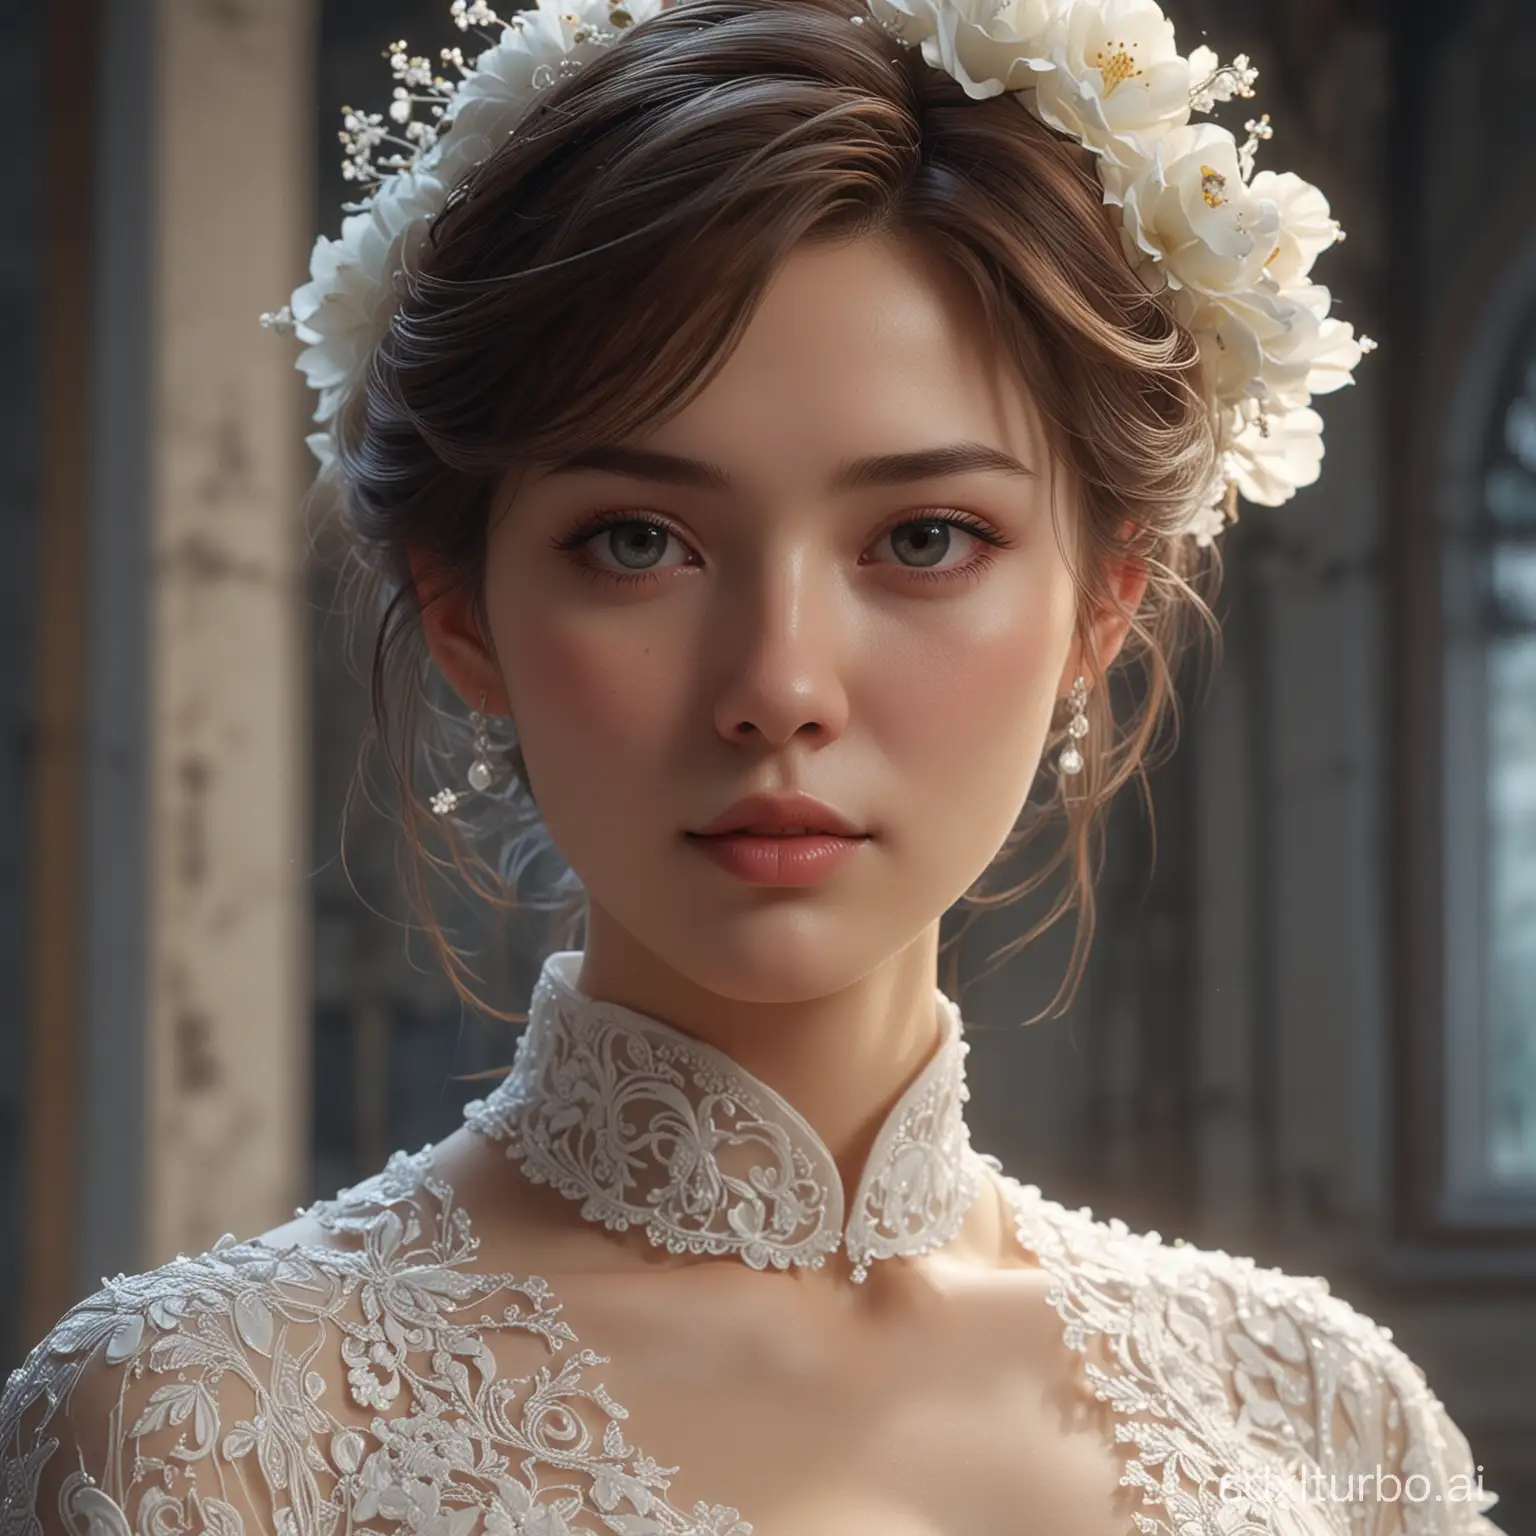 Short-haired girl, bride, wedding dress, exquisite facial details, close-up, church, (top CG) (high resolution) 1080p, (exquisite portrayal of facial features), (exquisite facial description), hair details, {{{by famous artist}}}, (((1girl))), white long dress, hyper-realistic, top CG rendering, highest quality, masterpiece, 8k, candles, flowers, James Jean, Rutkowski, fluid acrylic, gradient, liquid rococo fractal, Artgerm, WLOP, Rutkowski, fractal, octane
Model: 2.5D baby face, PT: ghostly style, LoRA: Asian face female-3(0.25), Hanfu-1(0.5)
